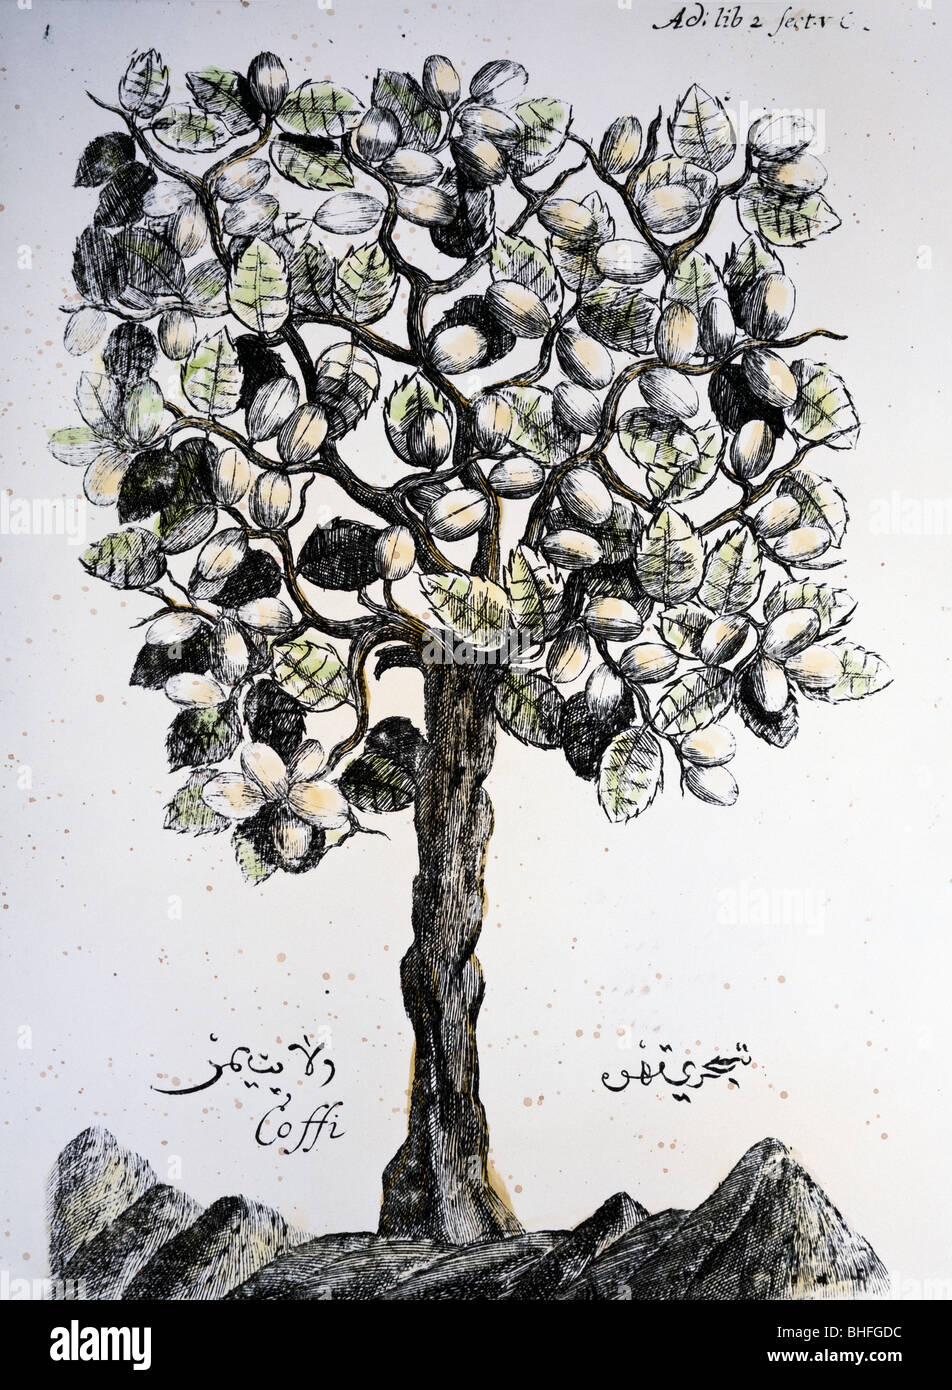 botany, Coffea, Arabica coffee (Coffea arabica), as tree, from 'Museum museorum', by Michael Bernhard Valentini, Fankfurt on the Main, Germany, 1714, private collection, Stock Photo